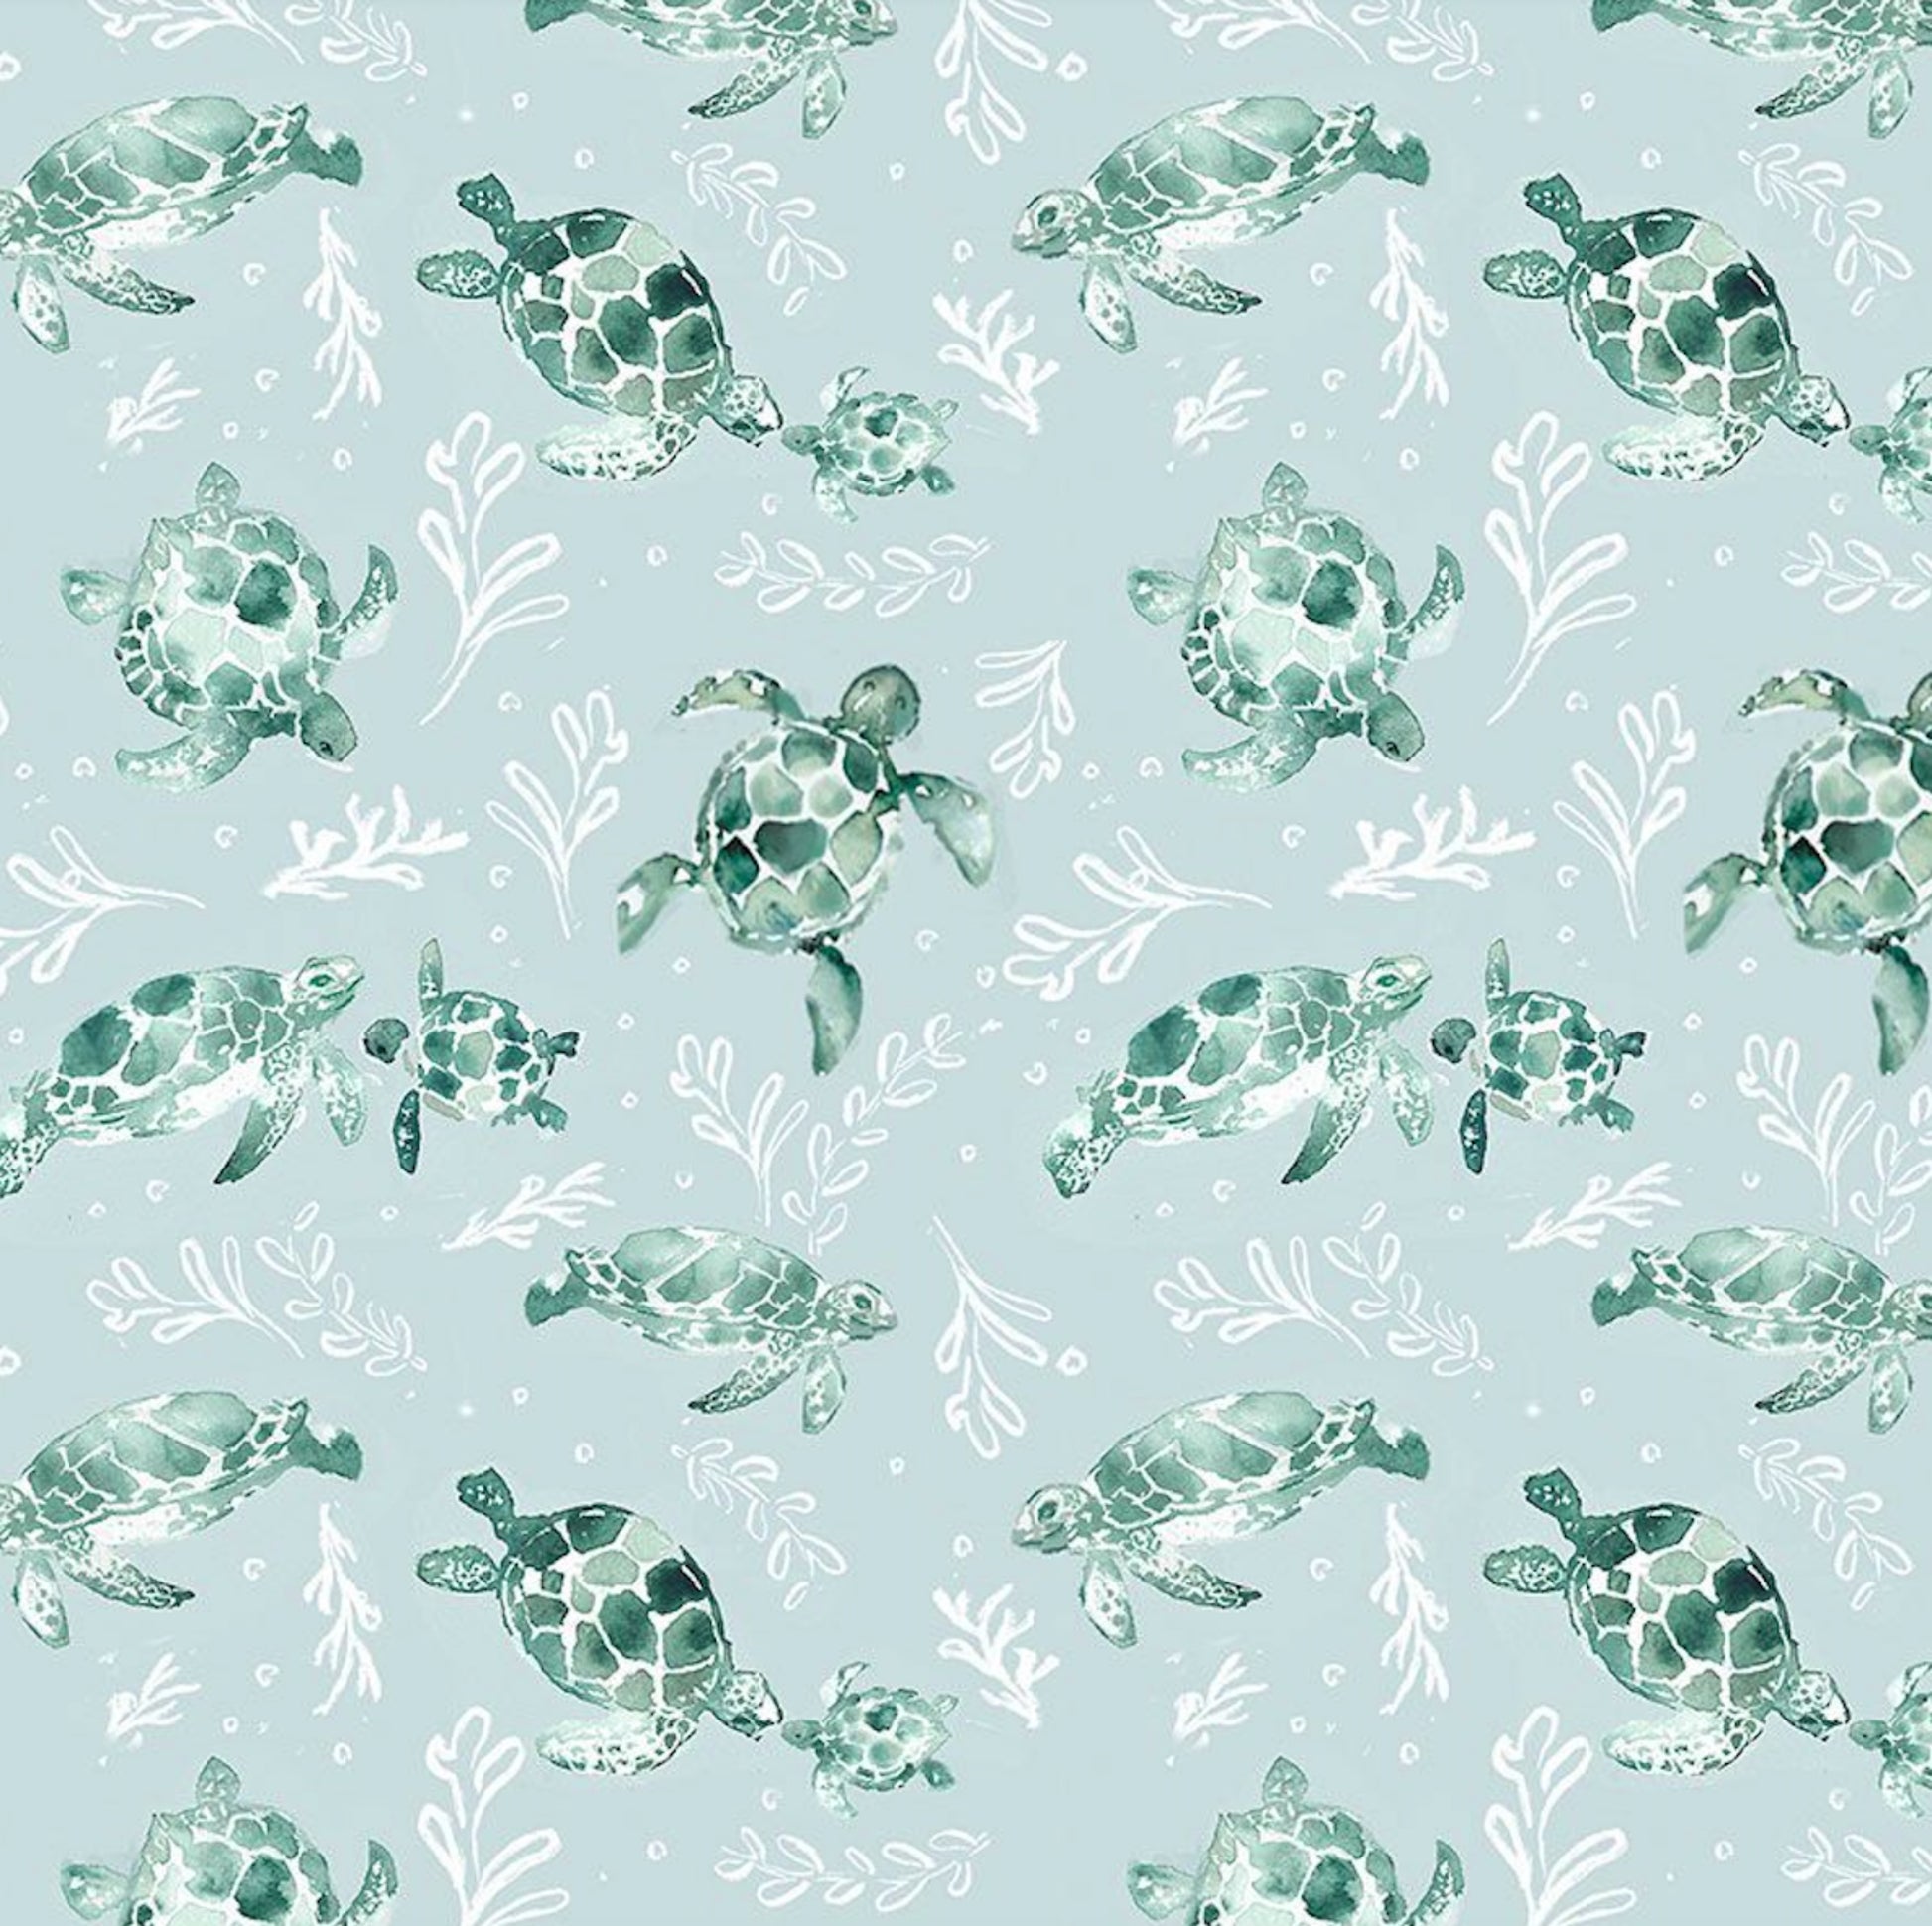 Turtles from the La Mer Collection by Clara Jean for Dear Stella Fabrics